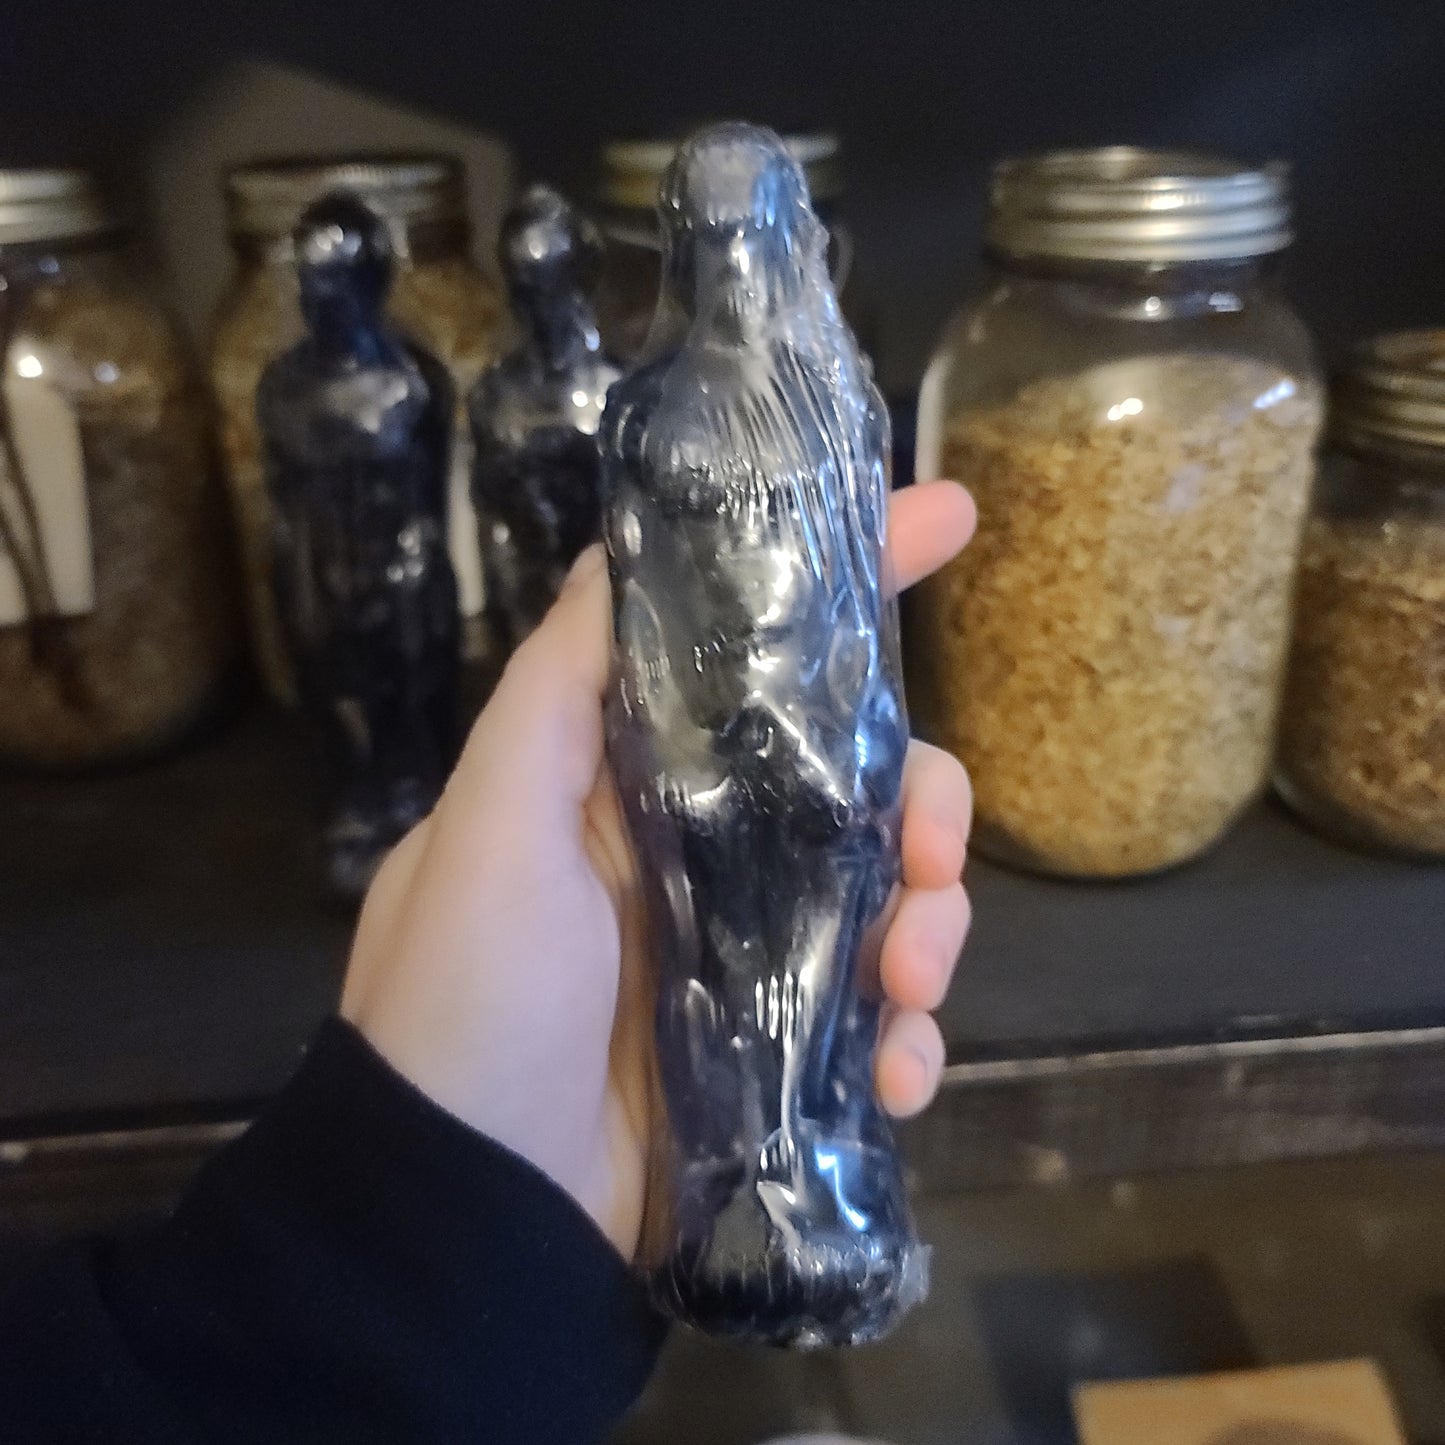 Male Figure Candle (Black) - Protection, Banishing, Wisdom, Absorb/Project Negative Energies, Curses/Binding, Anti-Anxiety/Depression, Self-Love, Masculine Energy, Sympathetic Magick (Poppet Alternative)